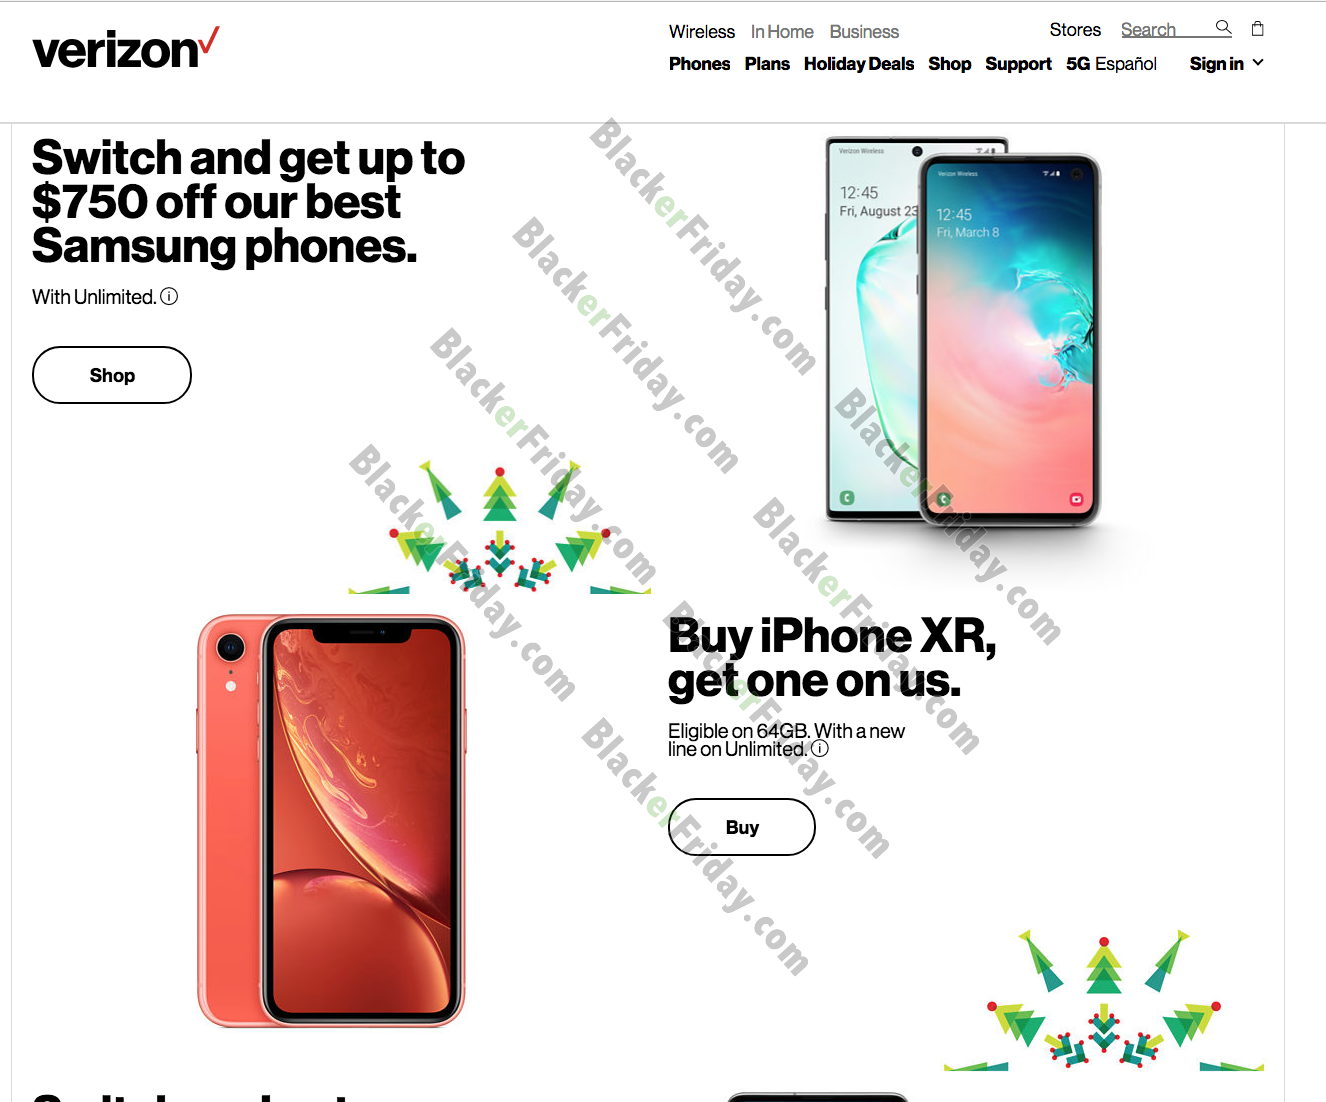 Verizon Wireless Black Friday 2020 Sale - What to Expect - Blacker Friday